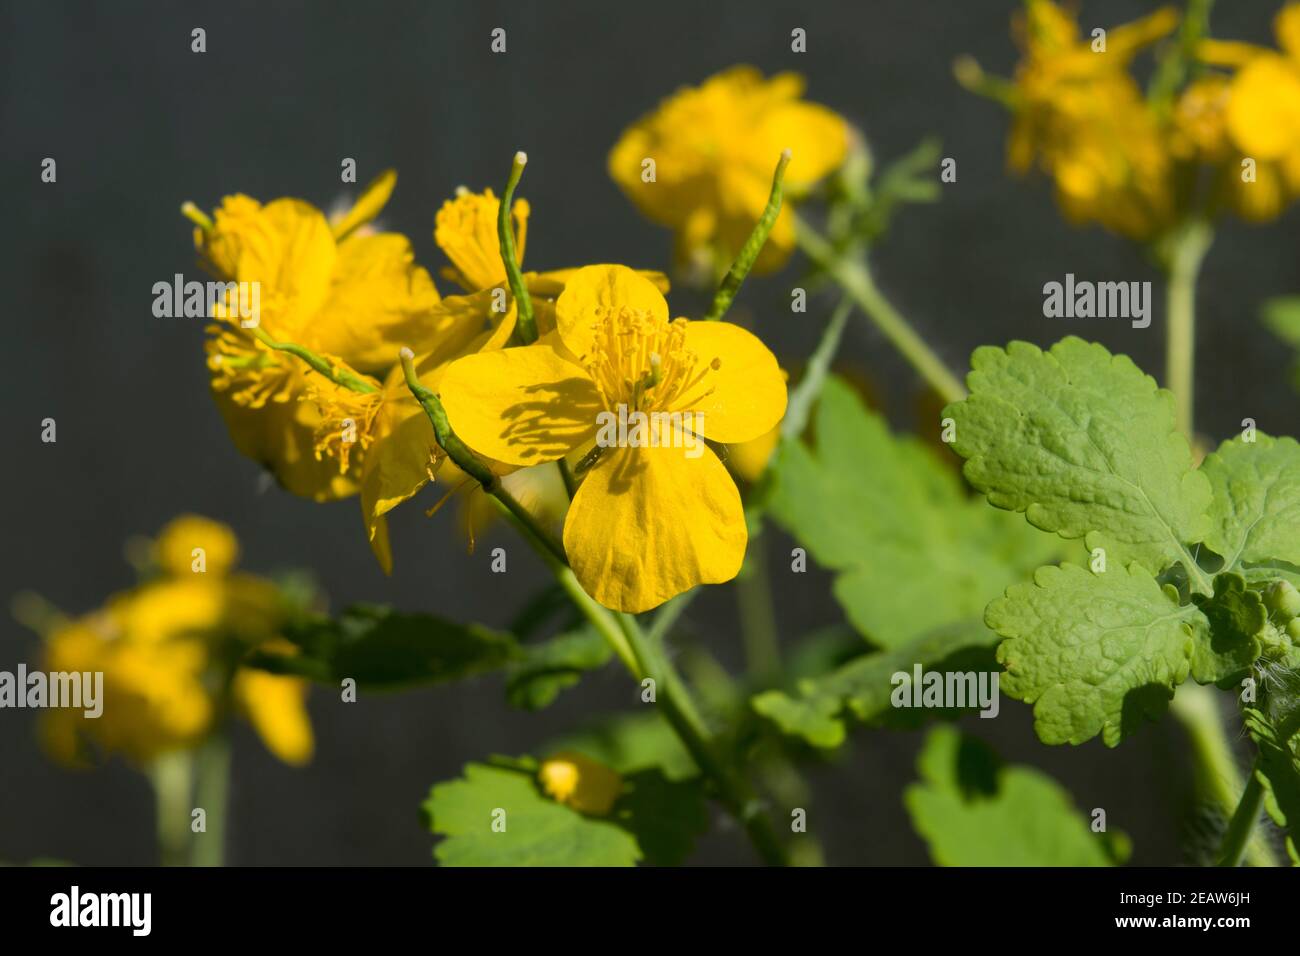 Celandine plant of the buttercup family that produces yellow flowers in the early spring. Sunny photo. Stock Photo